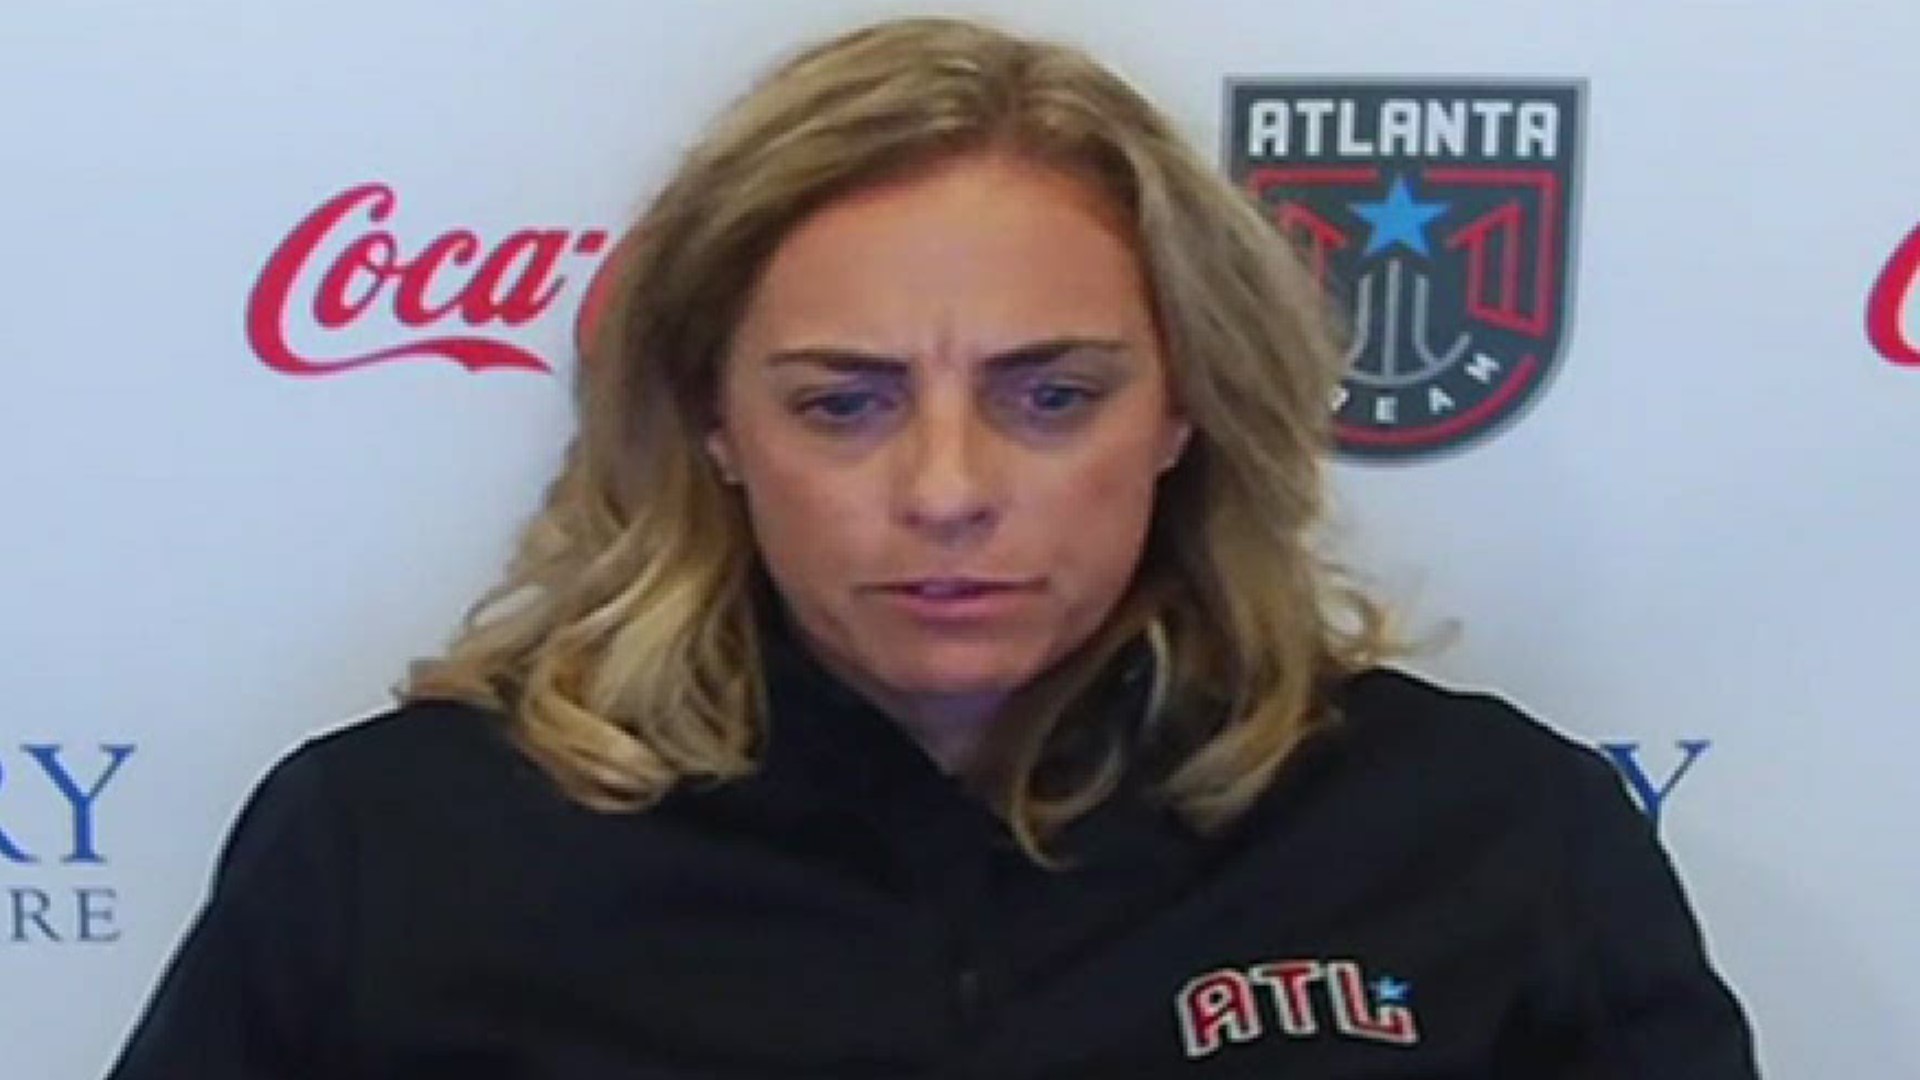 According to Atlanta Dream head coach Nicki Collen, the team wanted to take a stand when it came to a boycott of Wednesday's game.